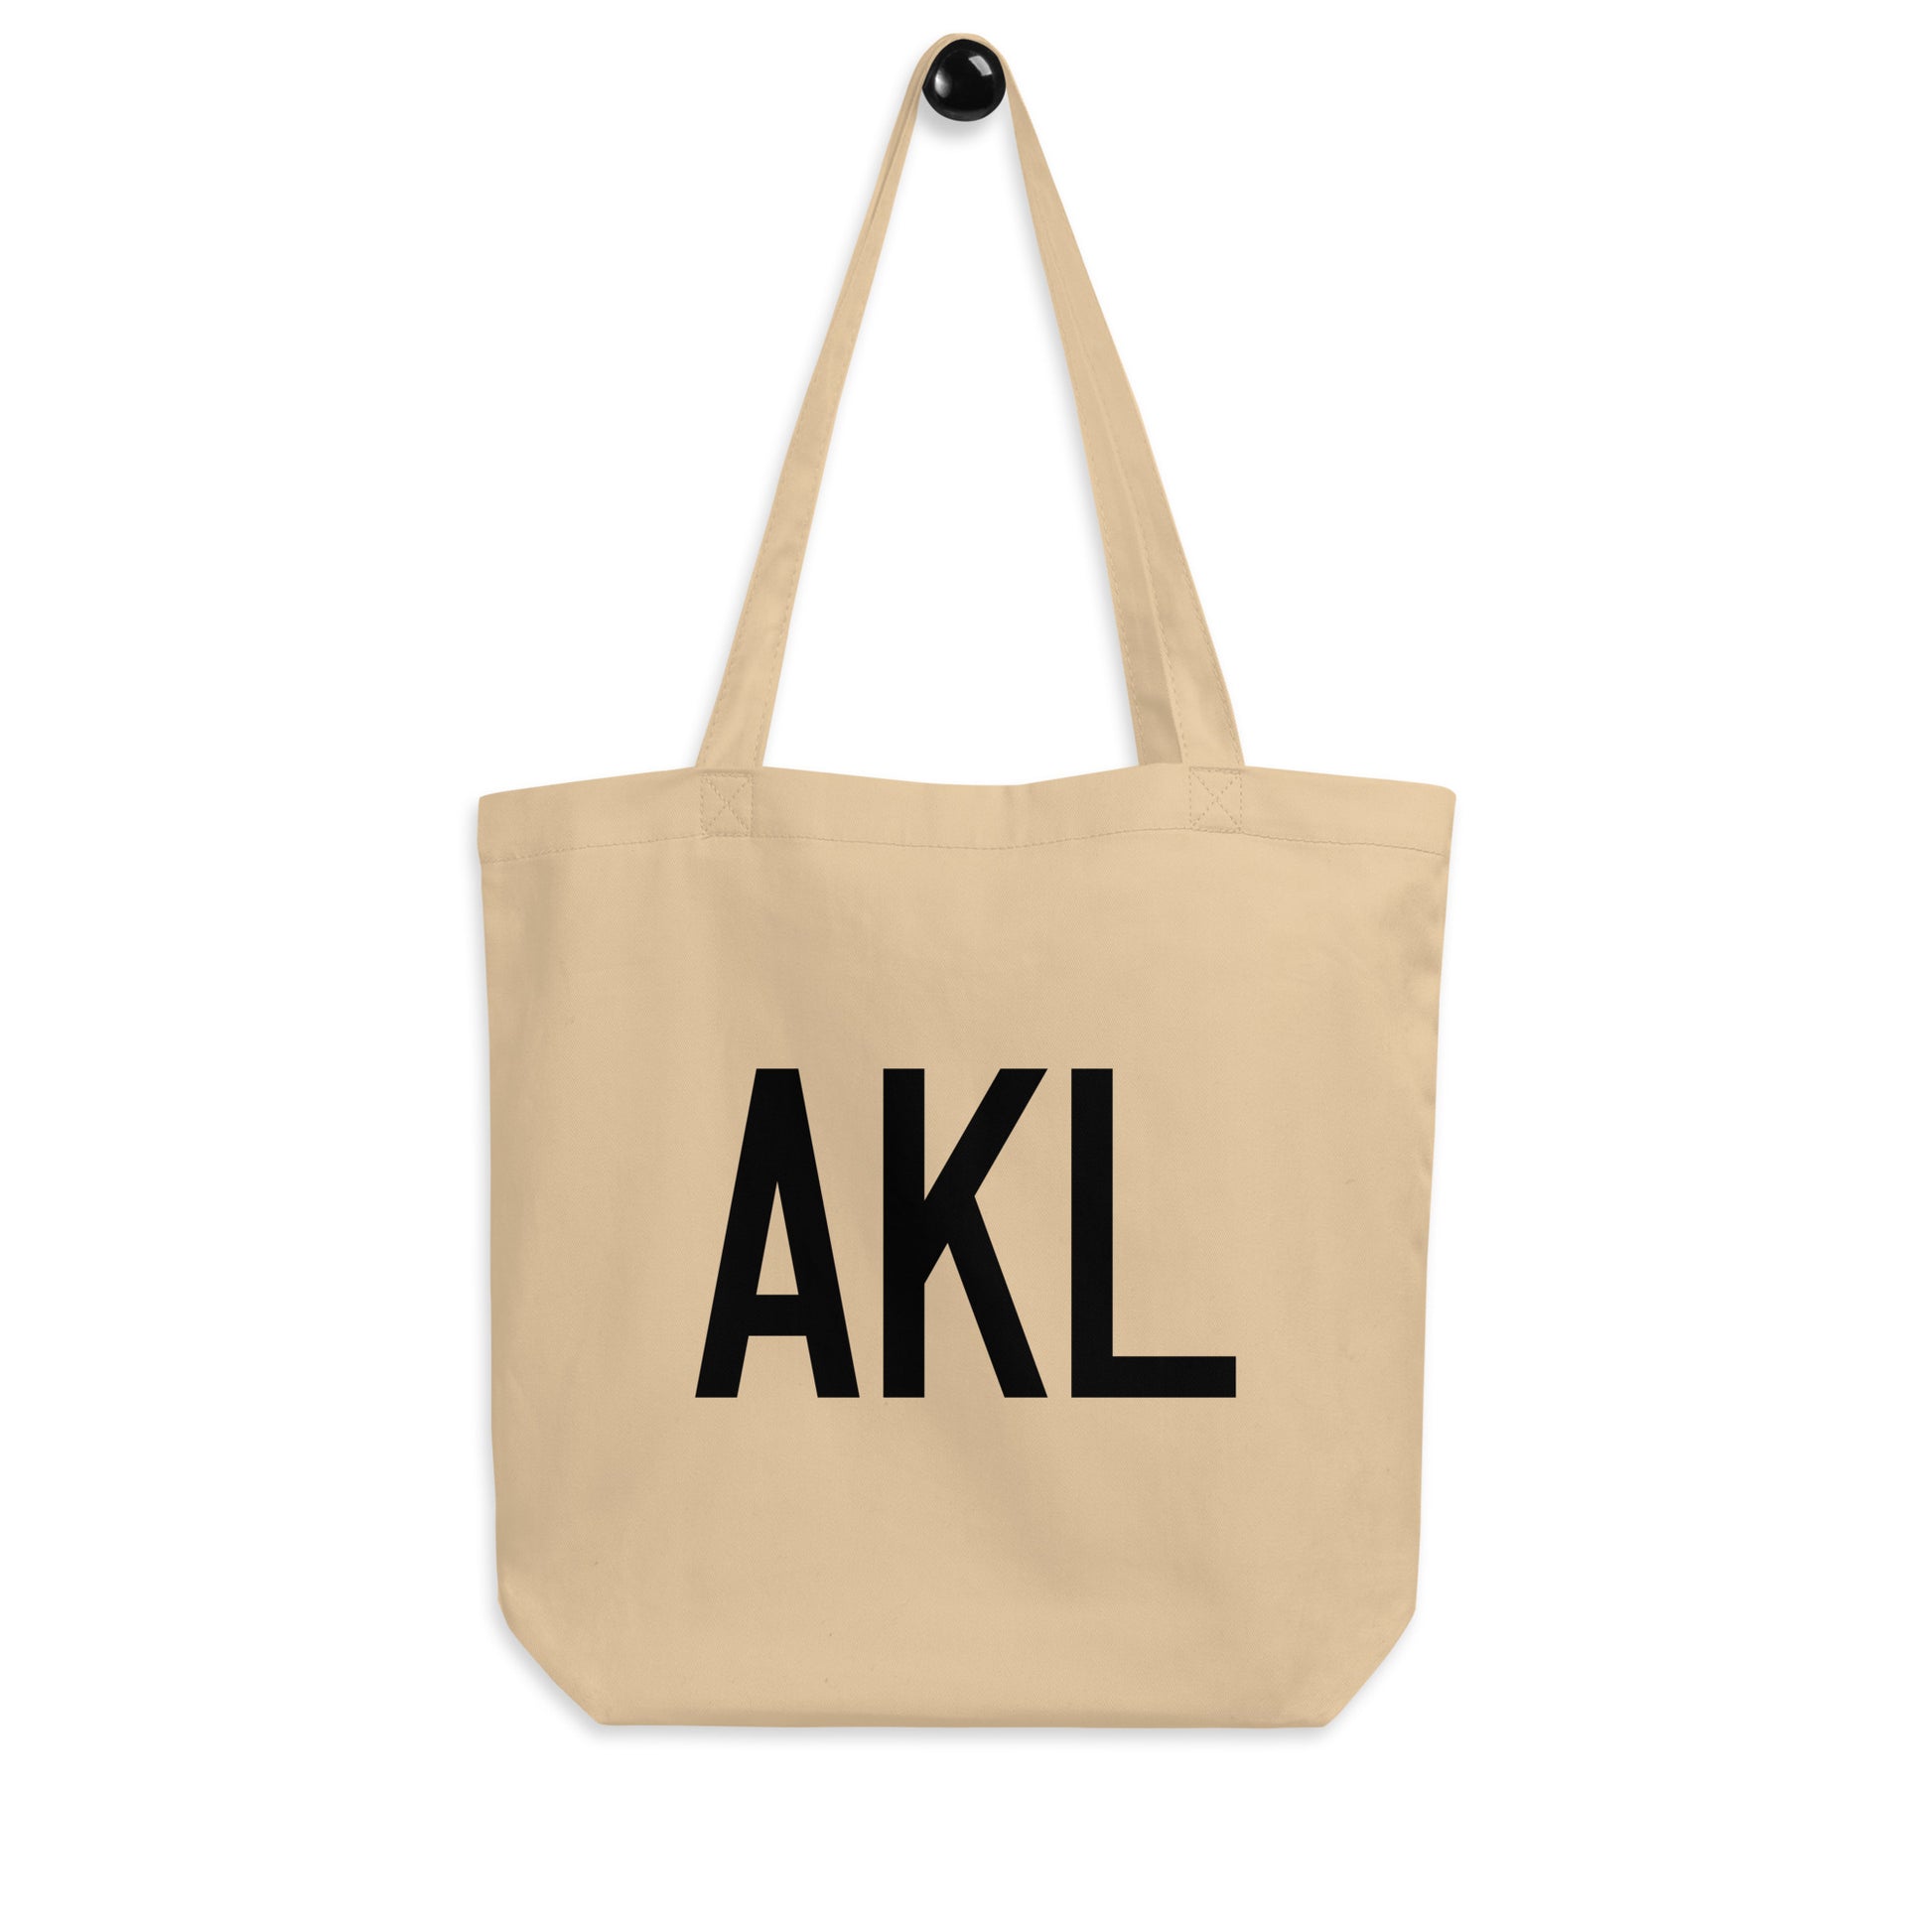 Aviation Gift Organic Tote - Black • AKL Auckland • YHM Designs - Image 04